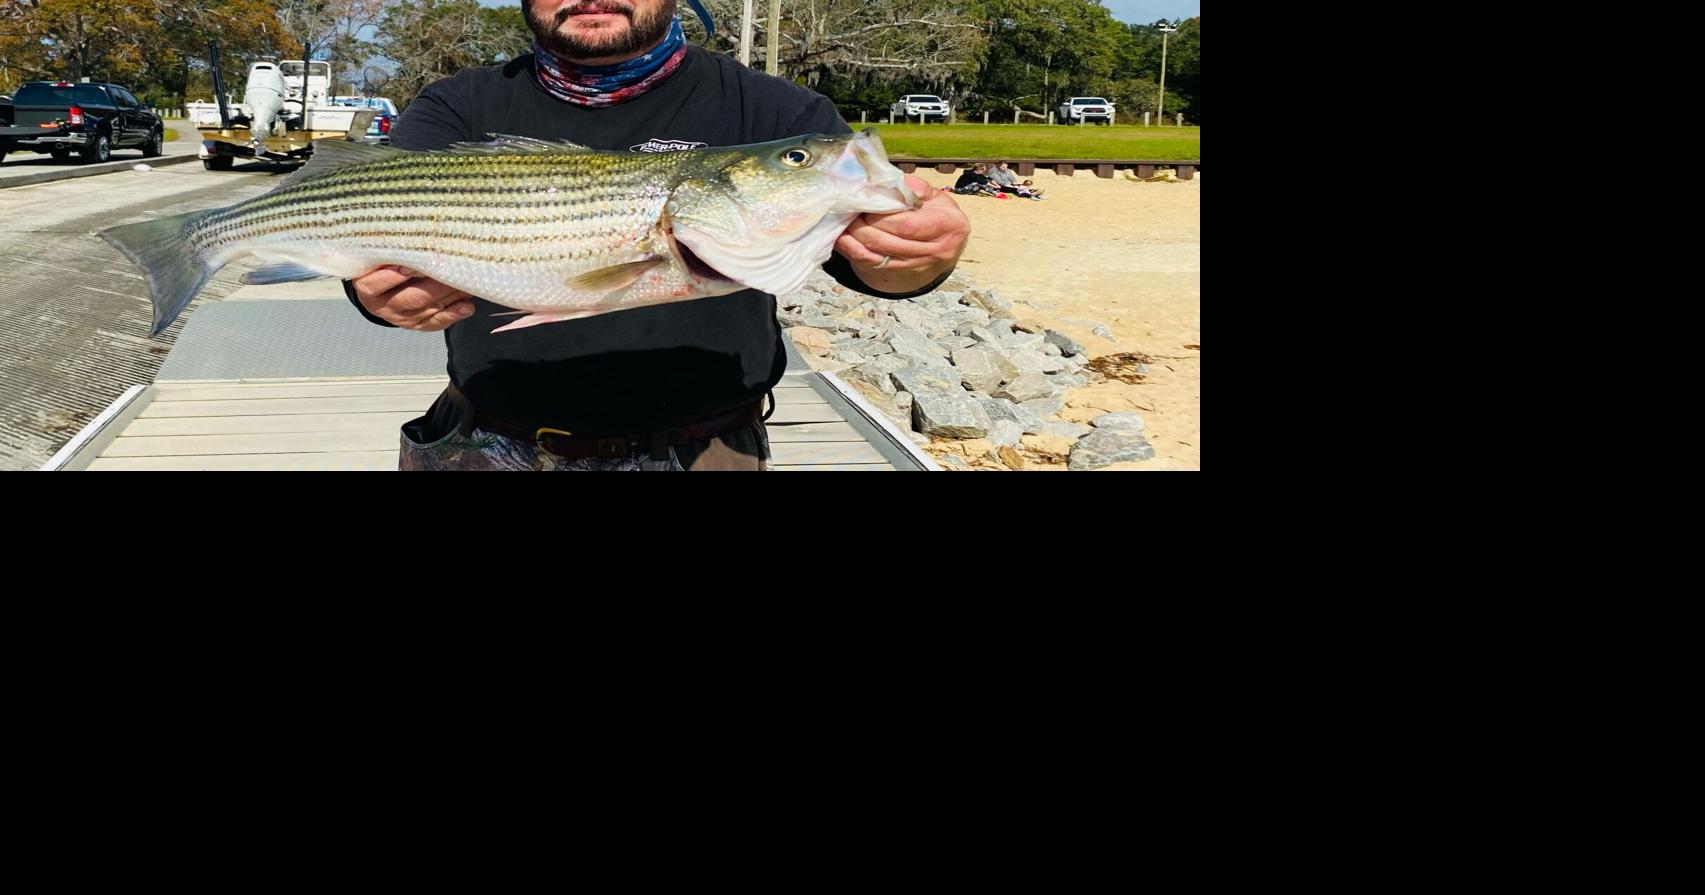 Cold outside? Let's fish for striper bass